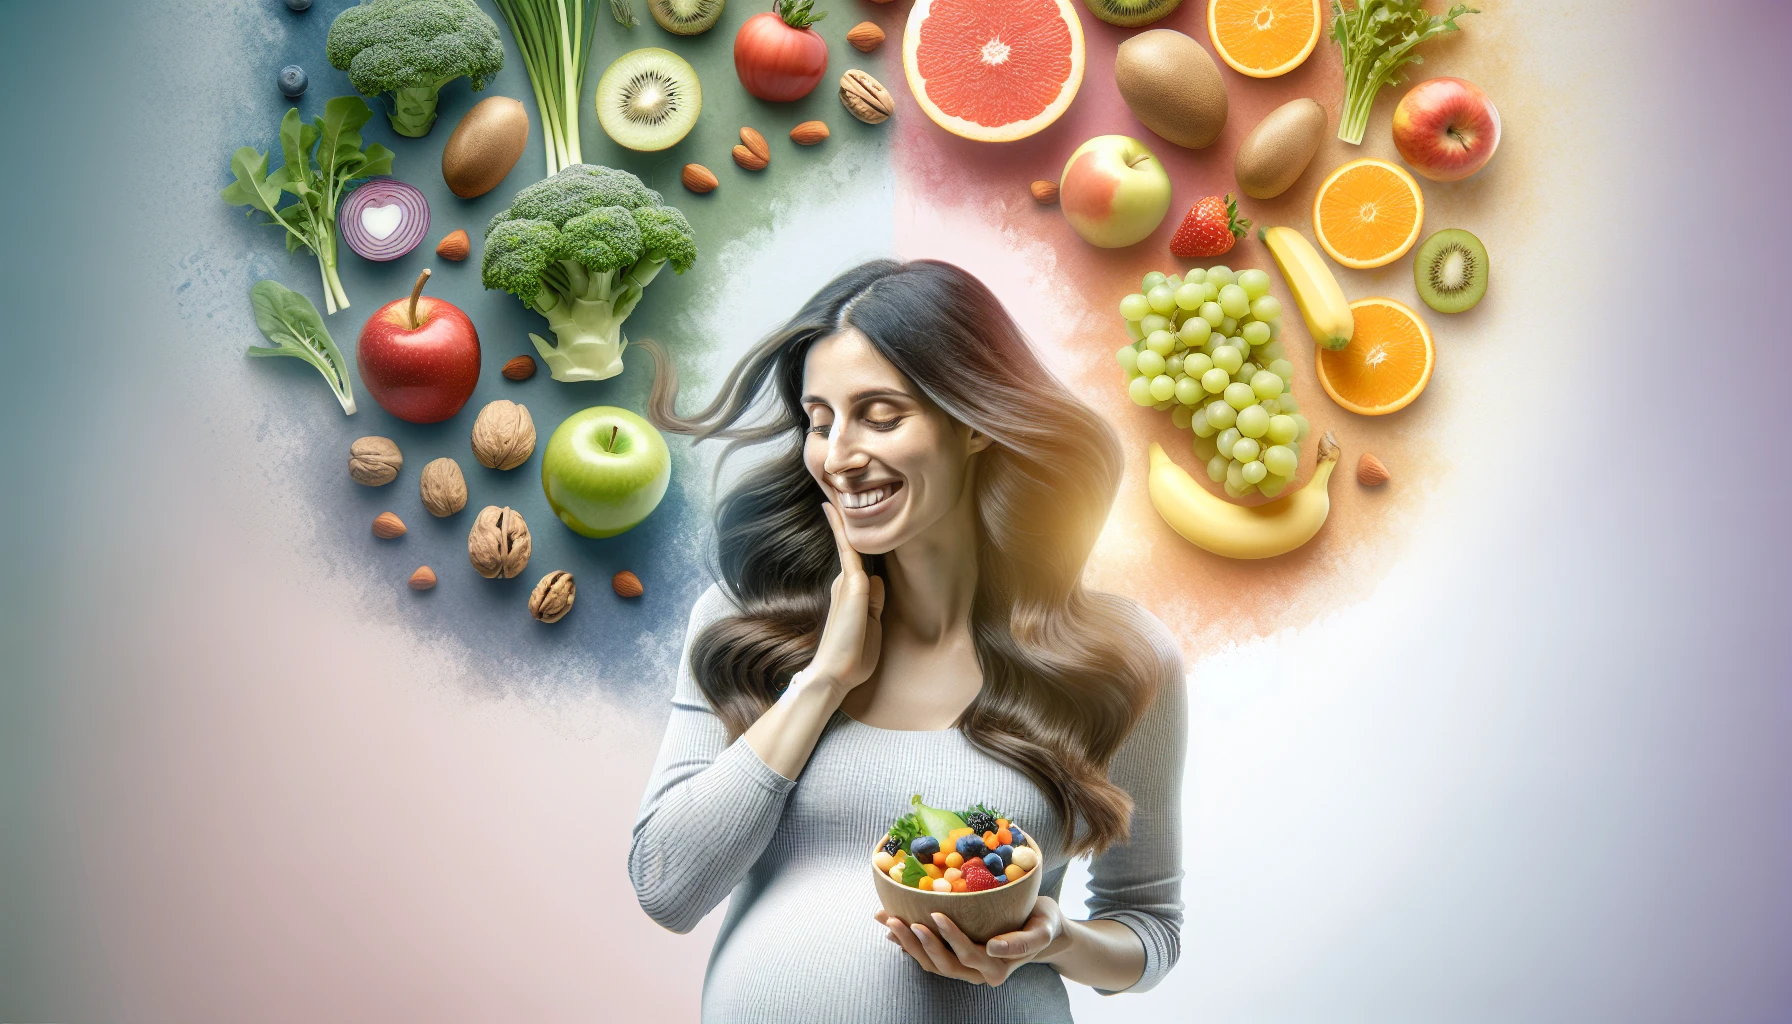 Illustration of various nutrients and vitamins promoting hair health